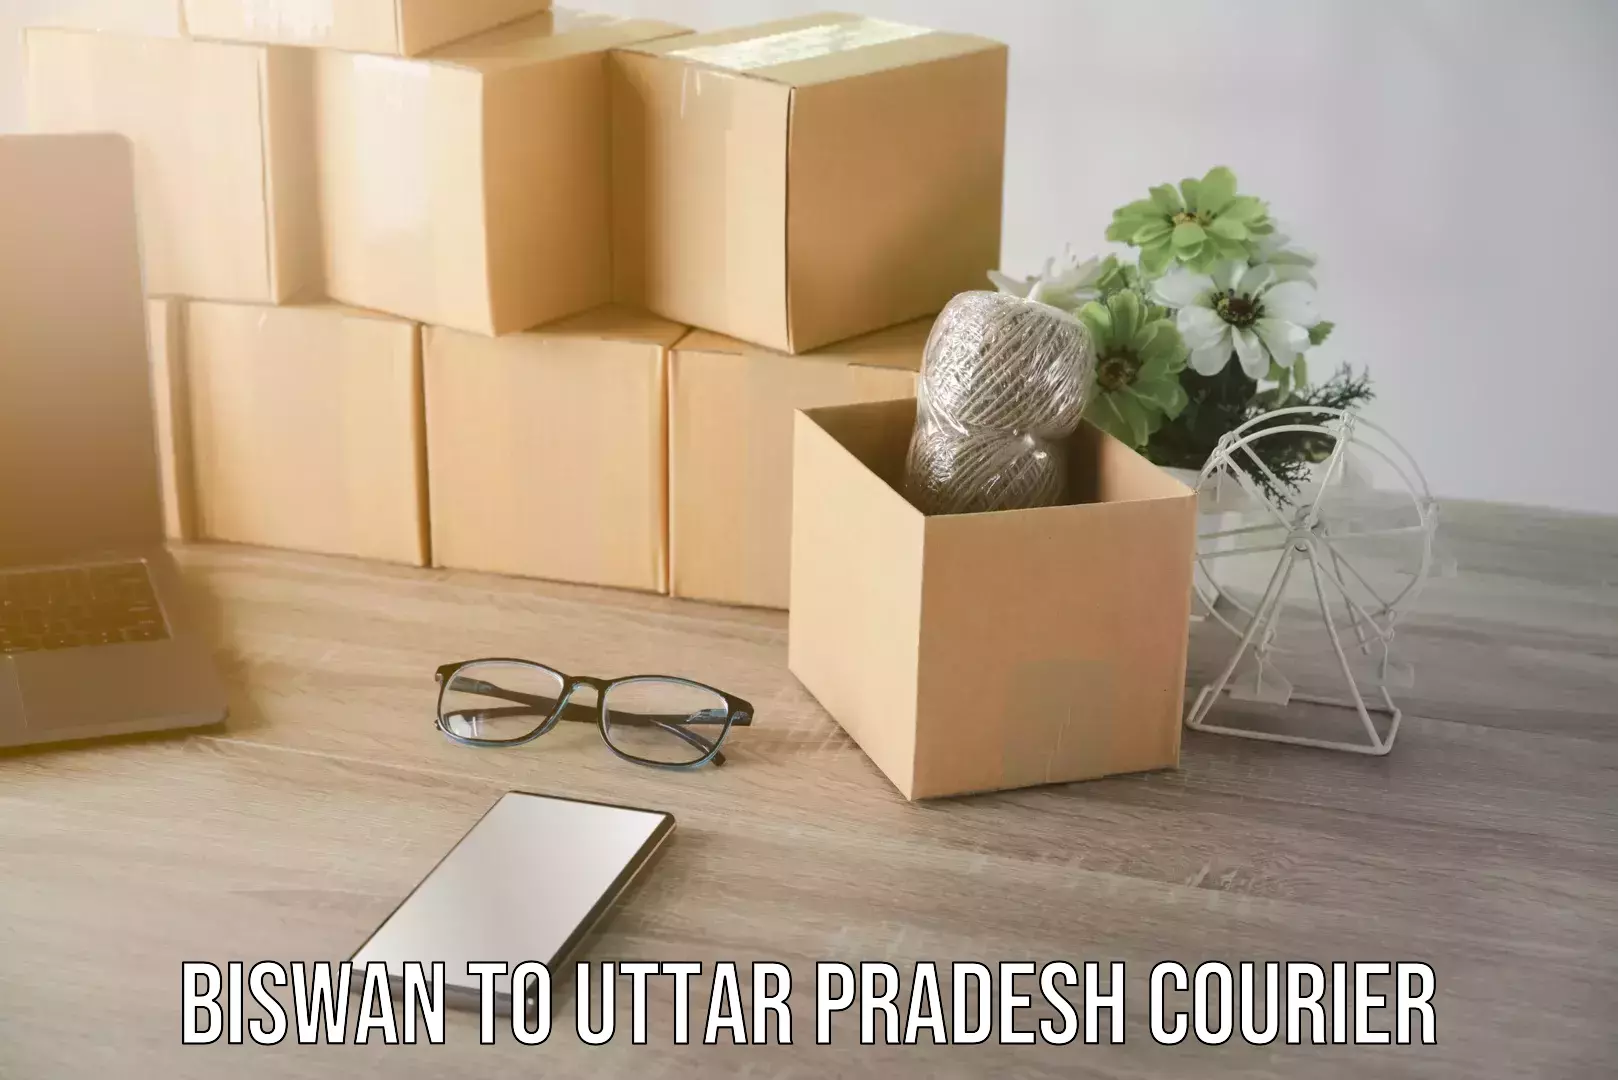 Courier service partnerships in Biswan to Noida